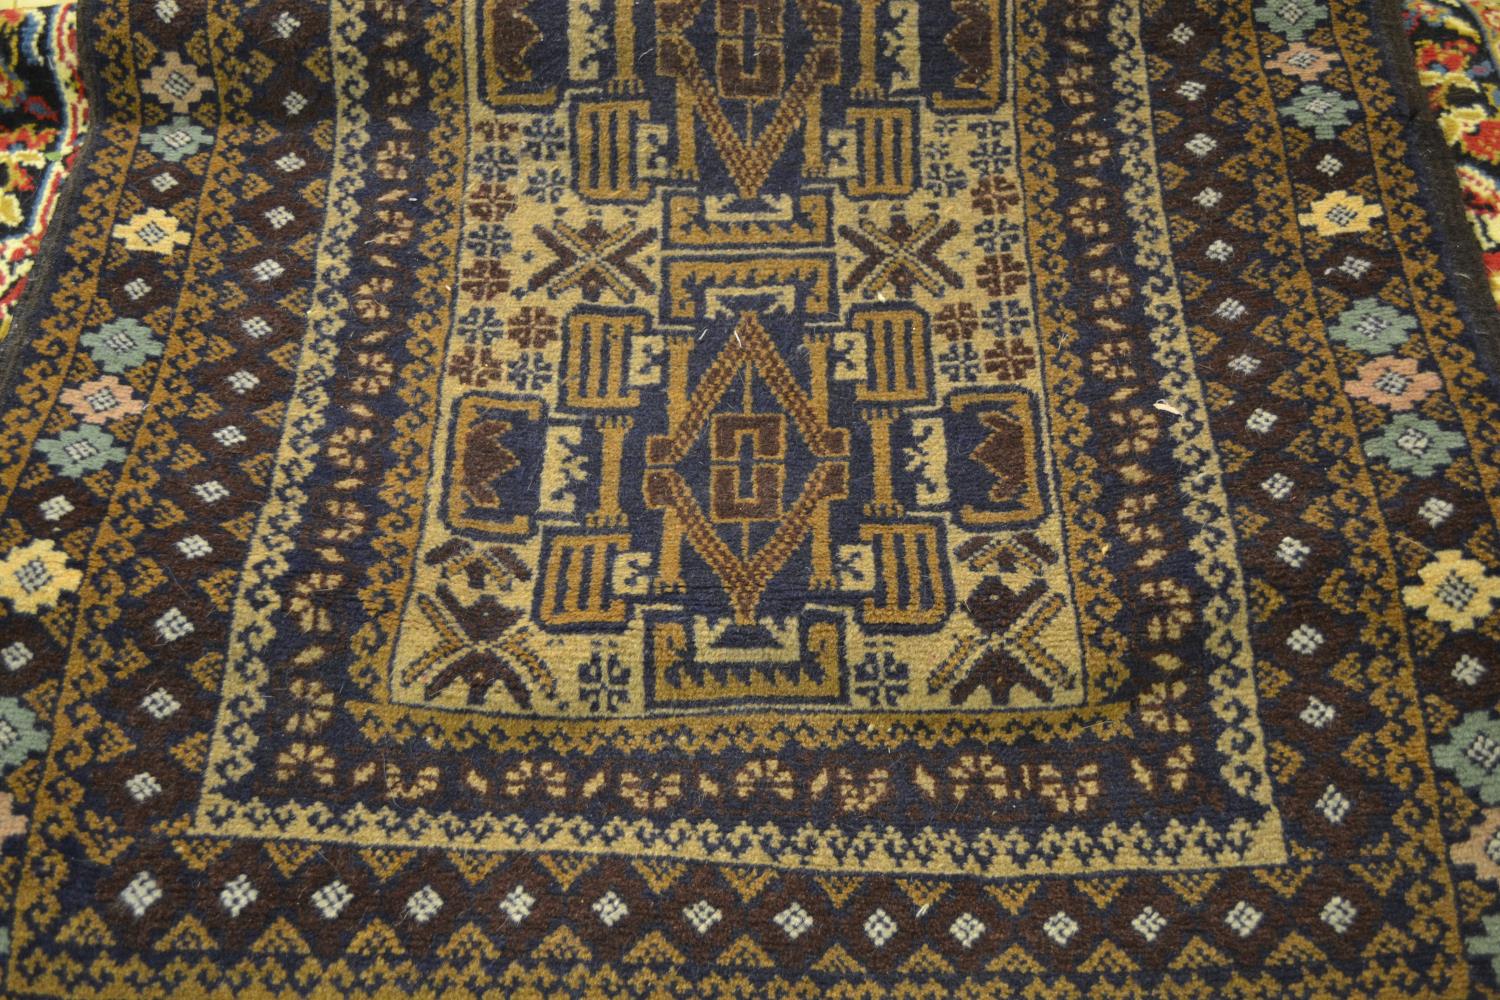 Small rug having single row of three medallions with multiple borders on beige and brown ground, 4ft